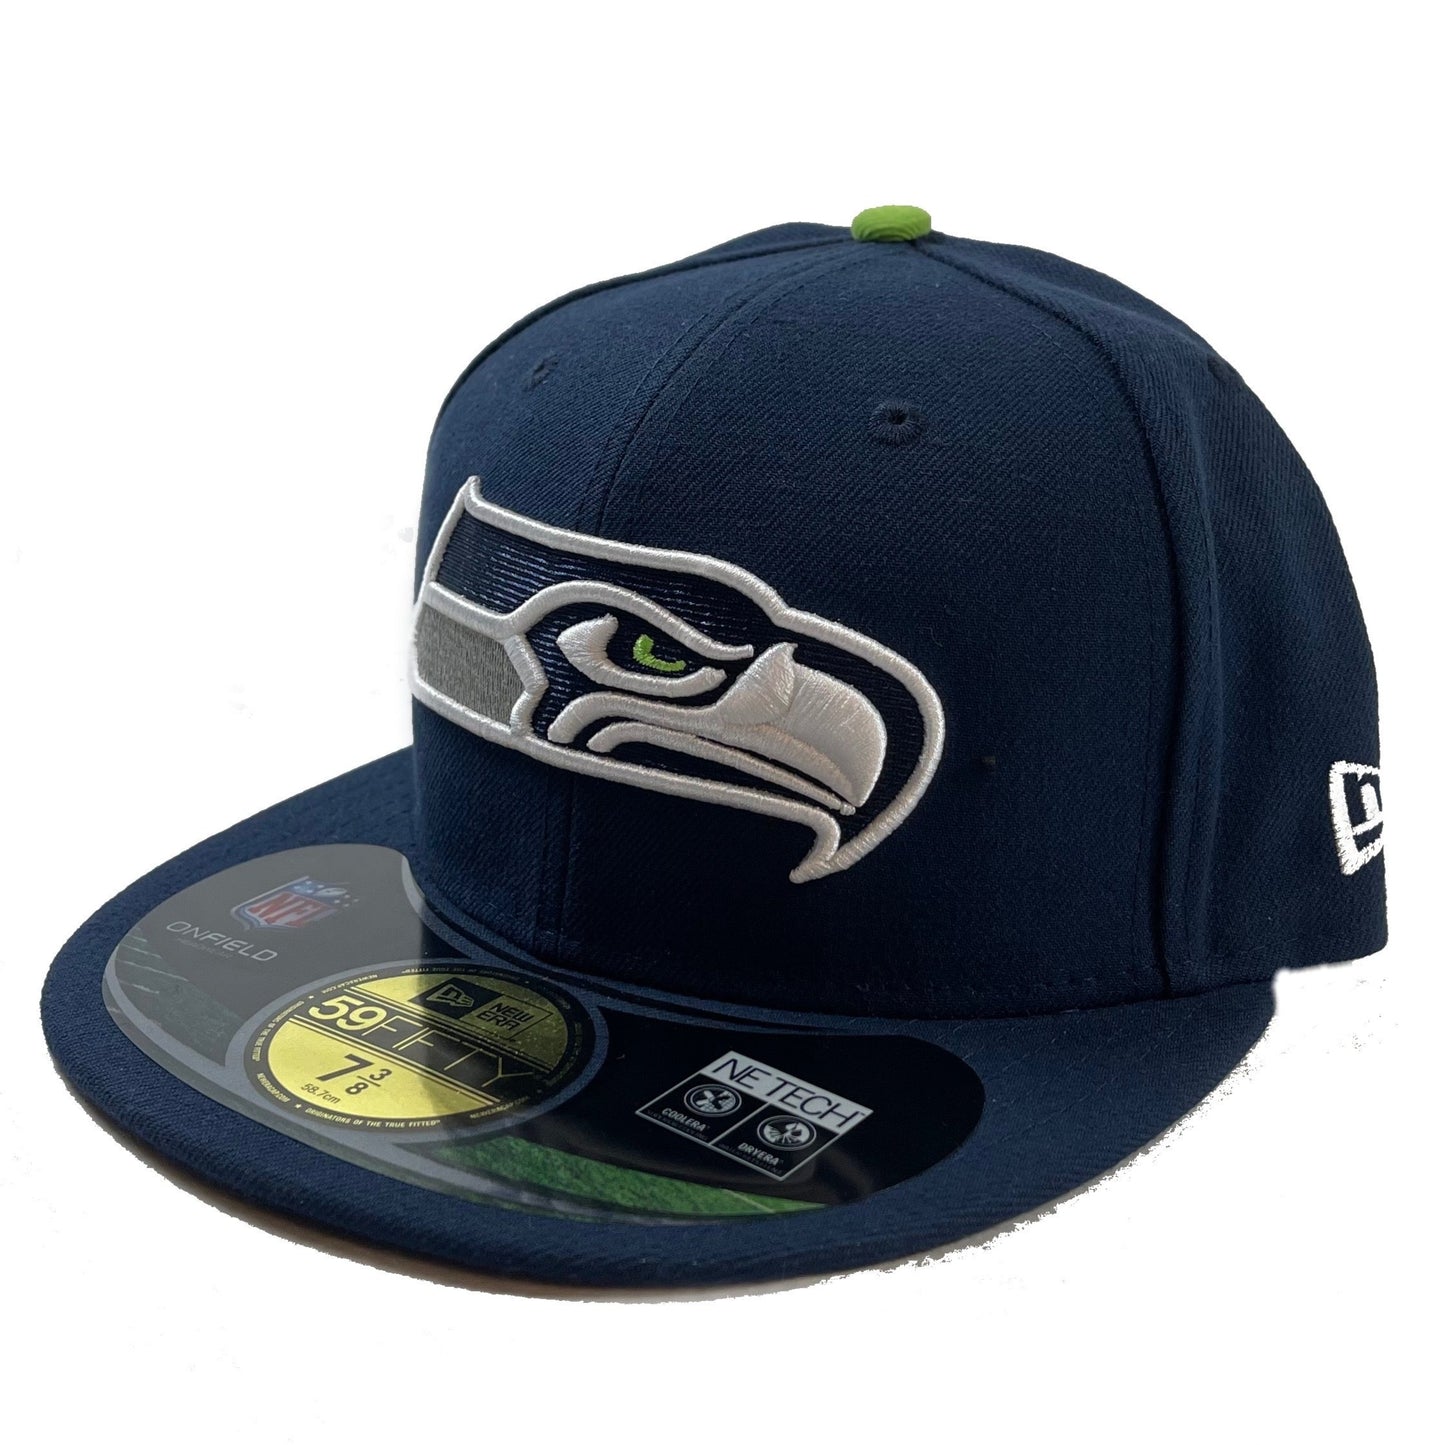 Seattle Seahawks (Navy) Fitted